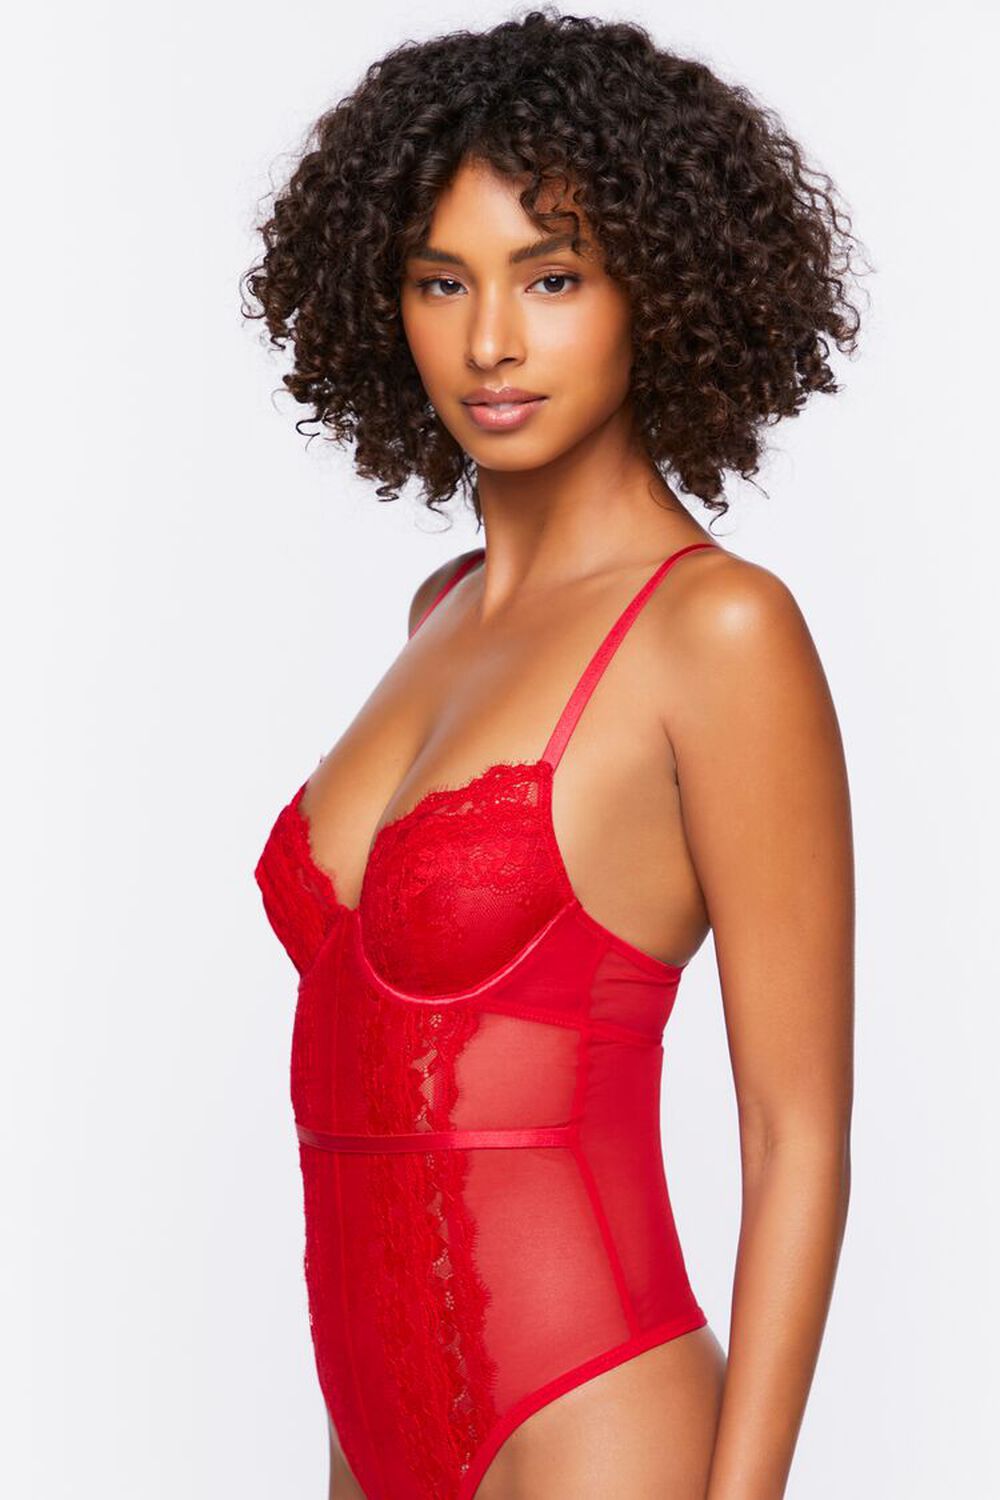 TOMATO Sheer Lace-Trim Teddy, image 2